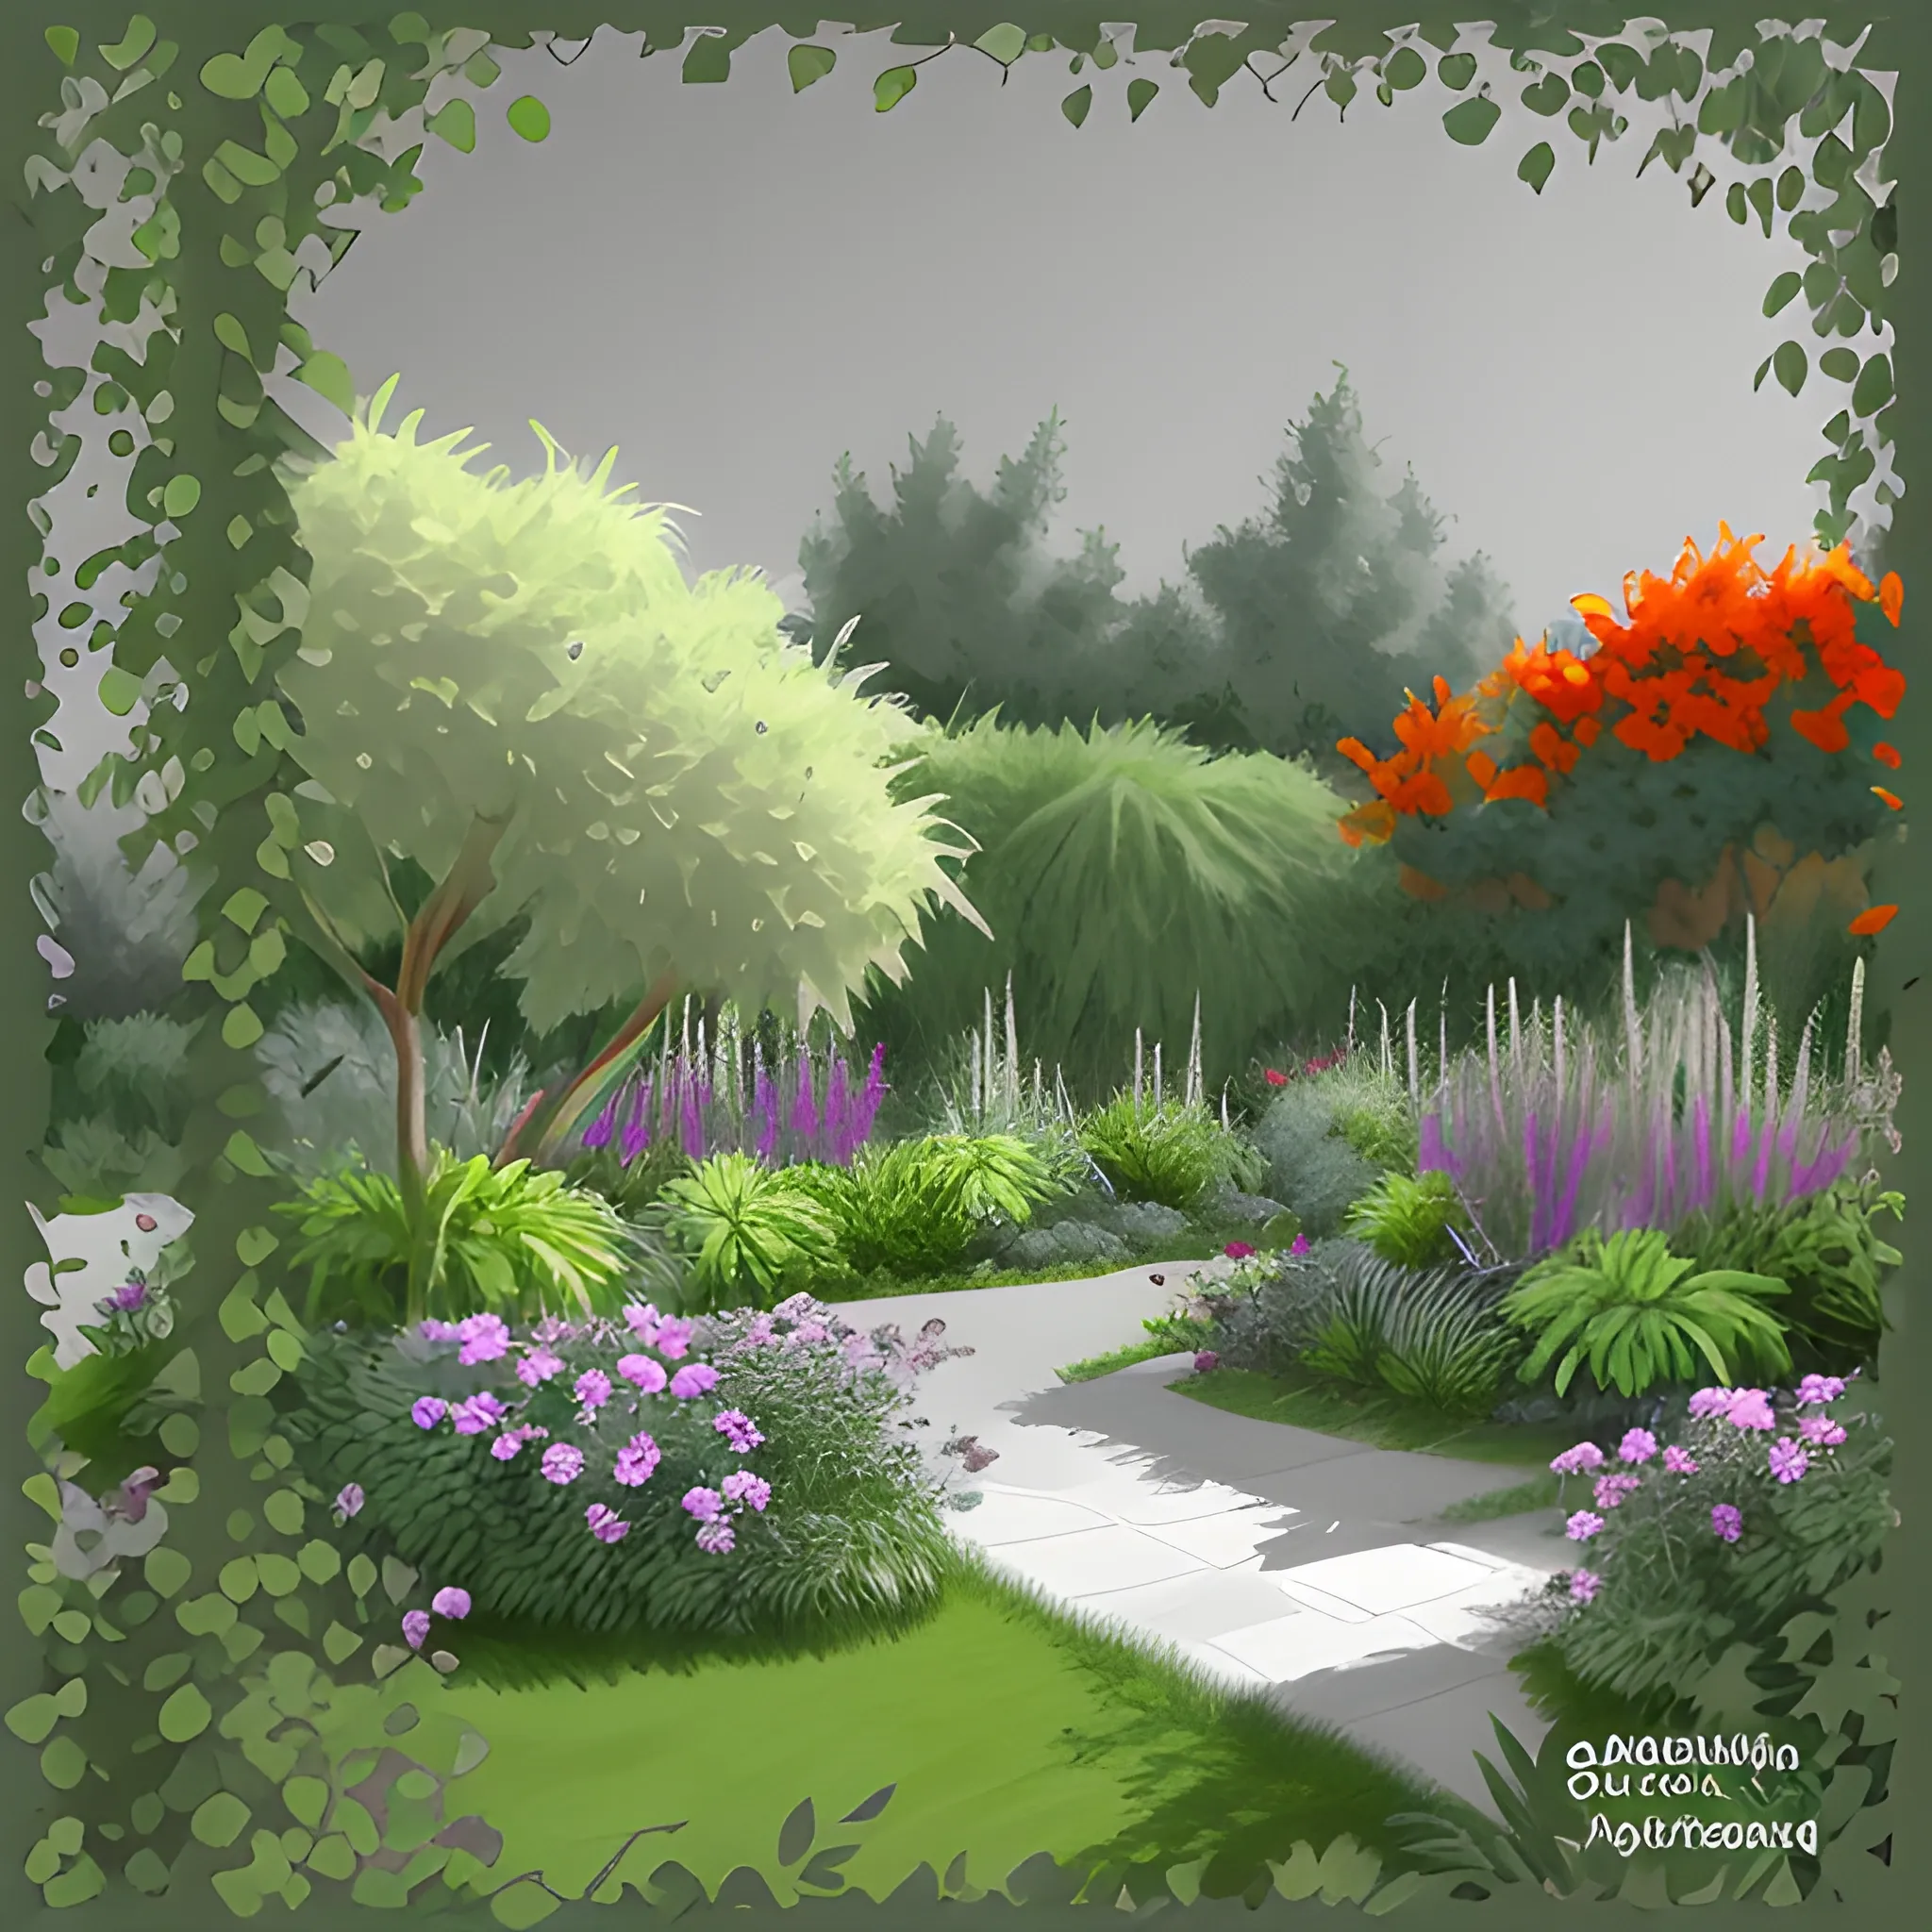 garden with very large leafy plants in digital painting style with warm gray colors